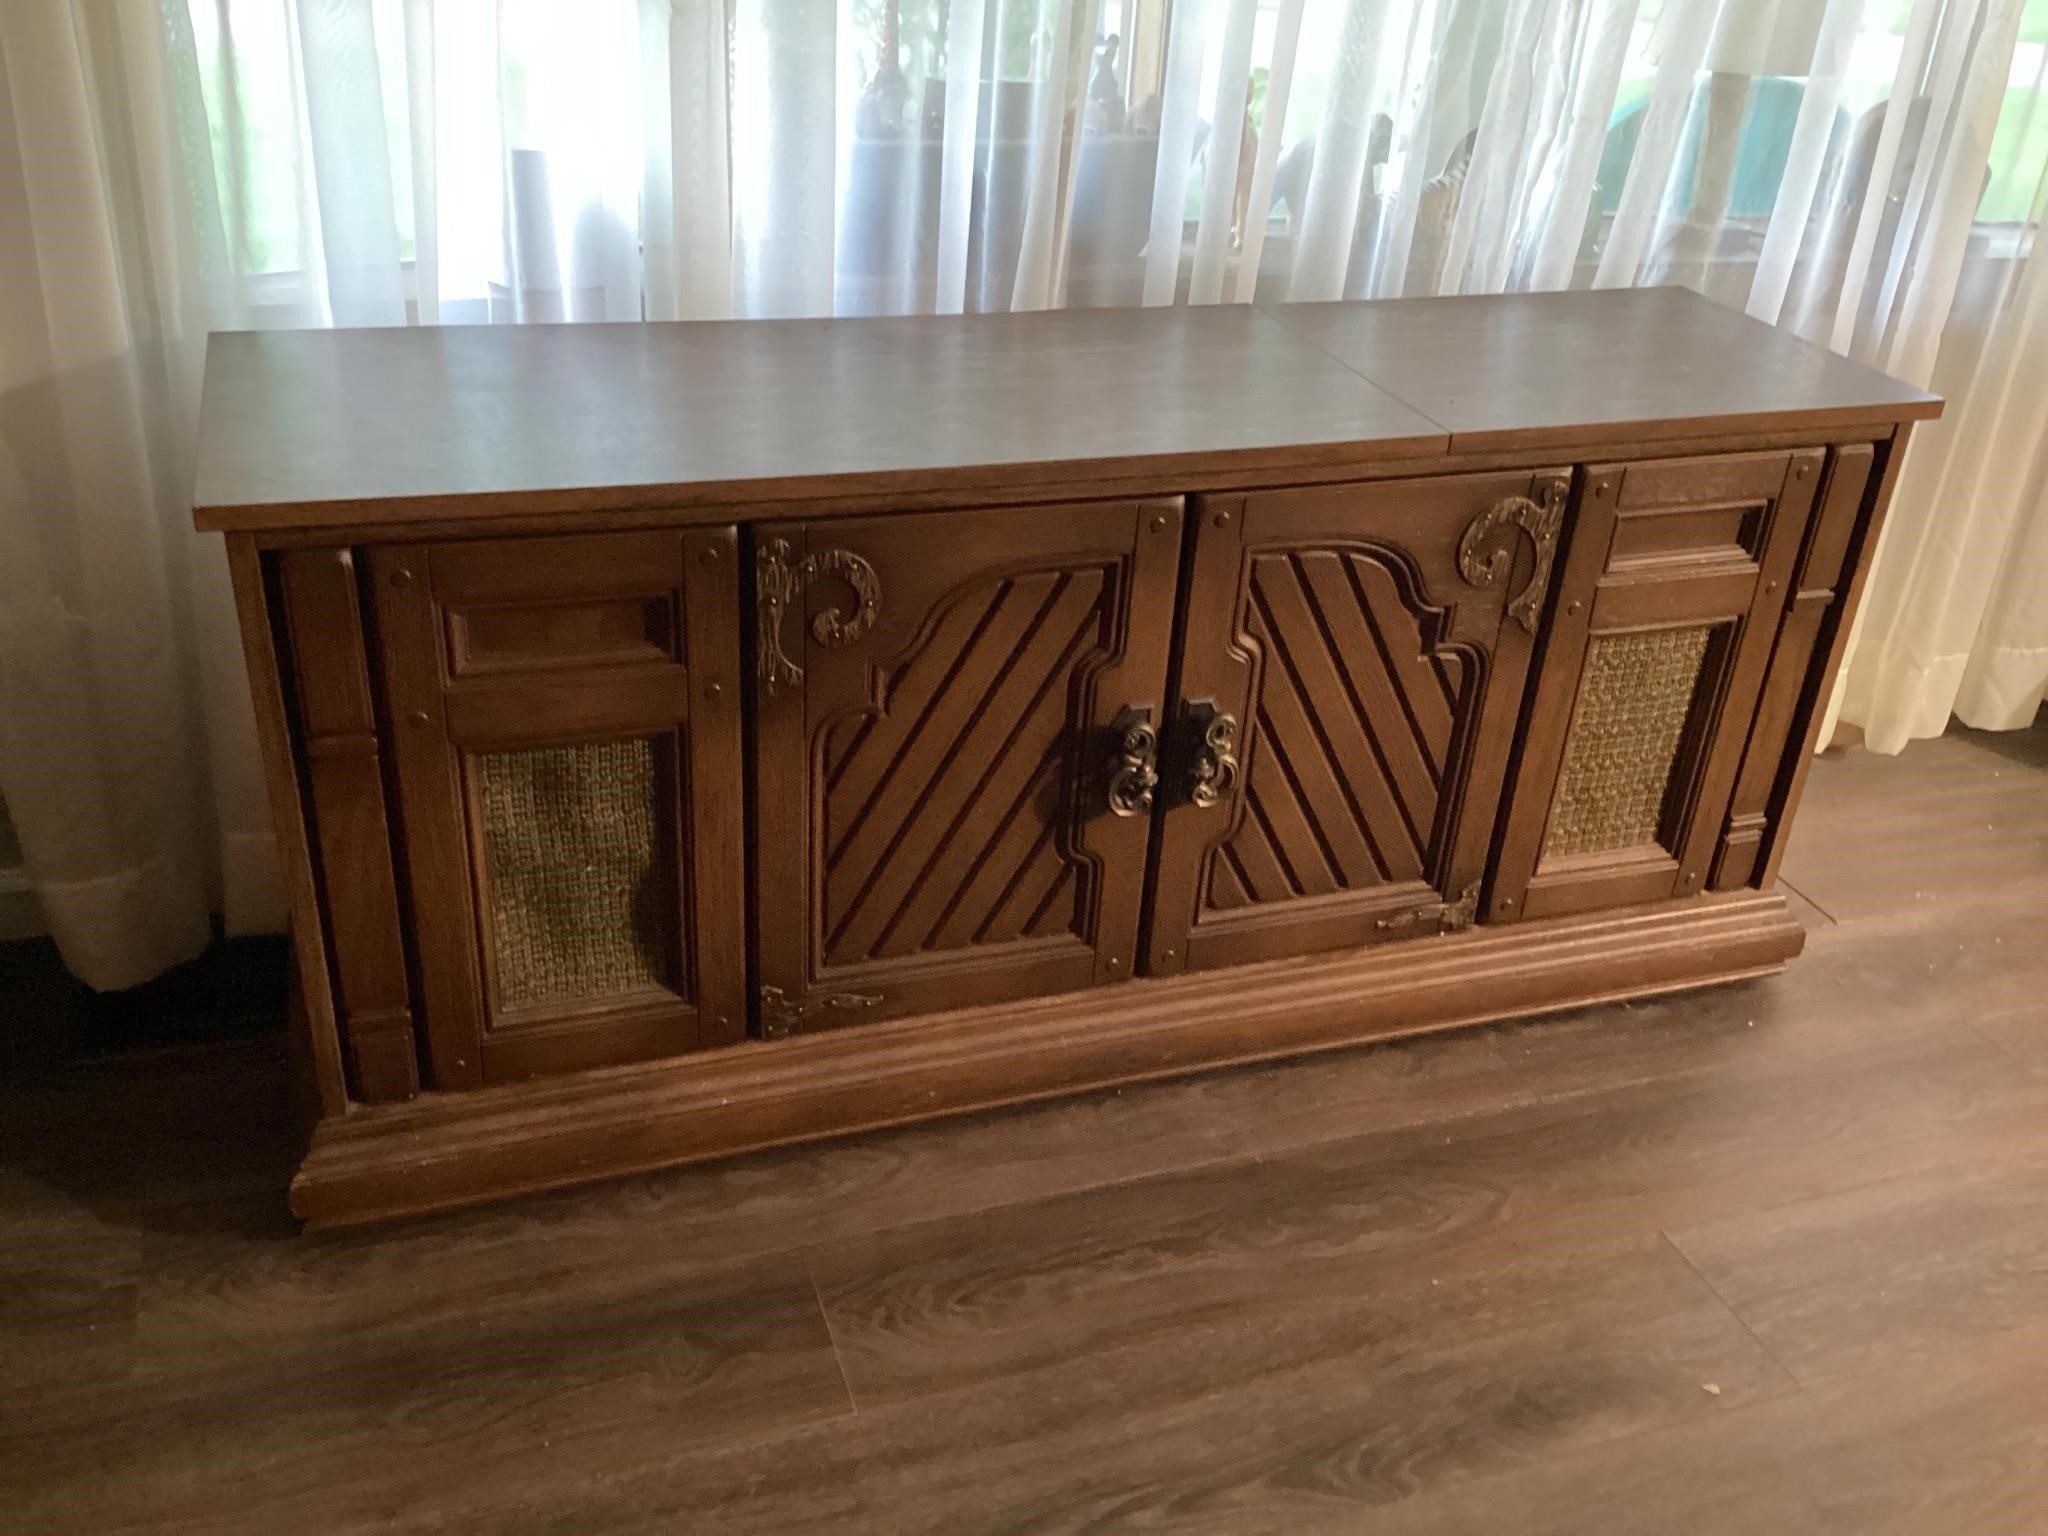 Vintage sears Stereo entertainment center